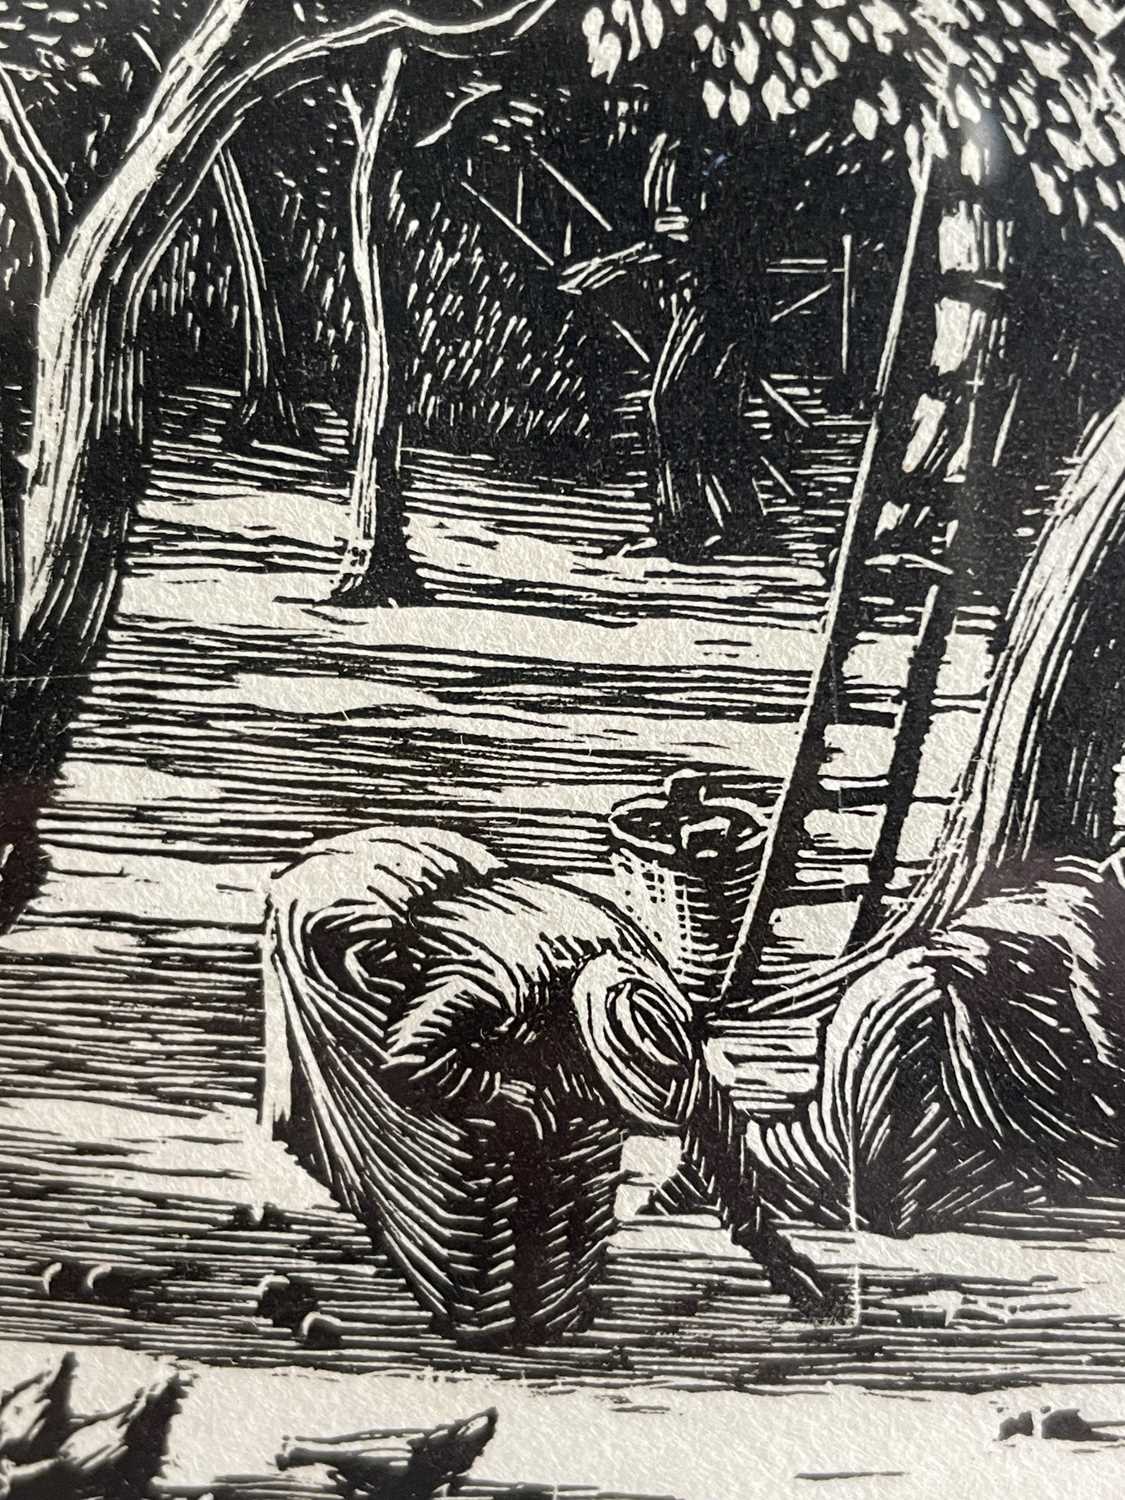 Gwen Raverat (1855-1957) "Apple Pickers" Wood engraving, together with a further wood engraving by - Image 10 of 14